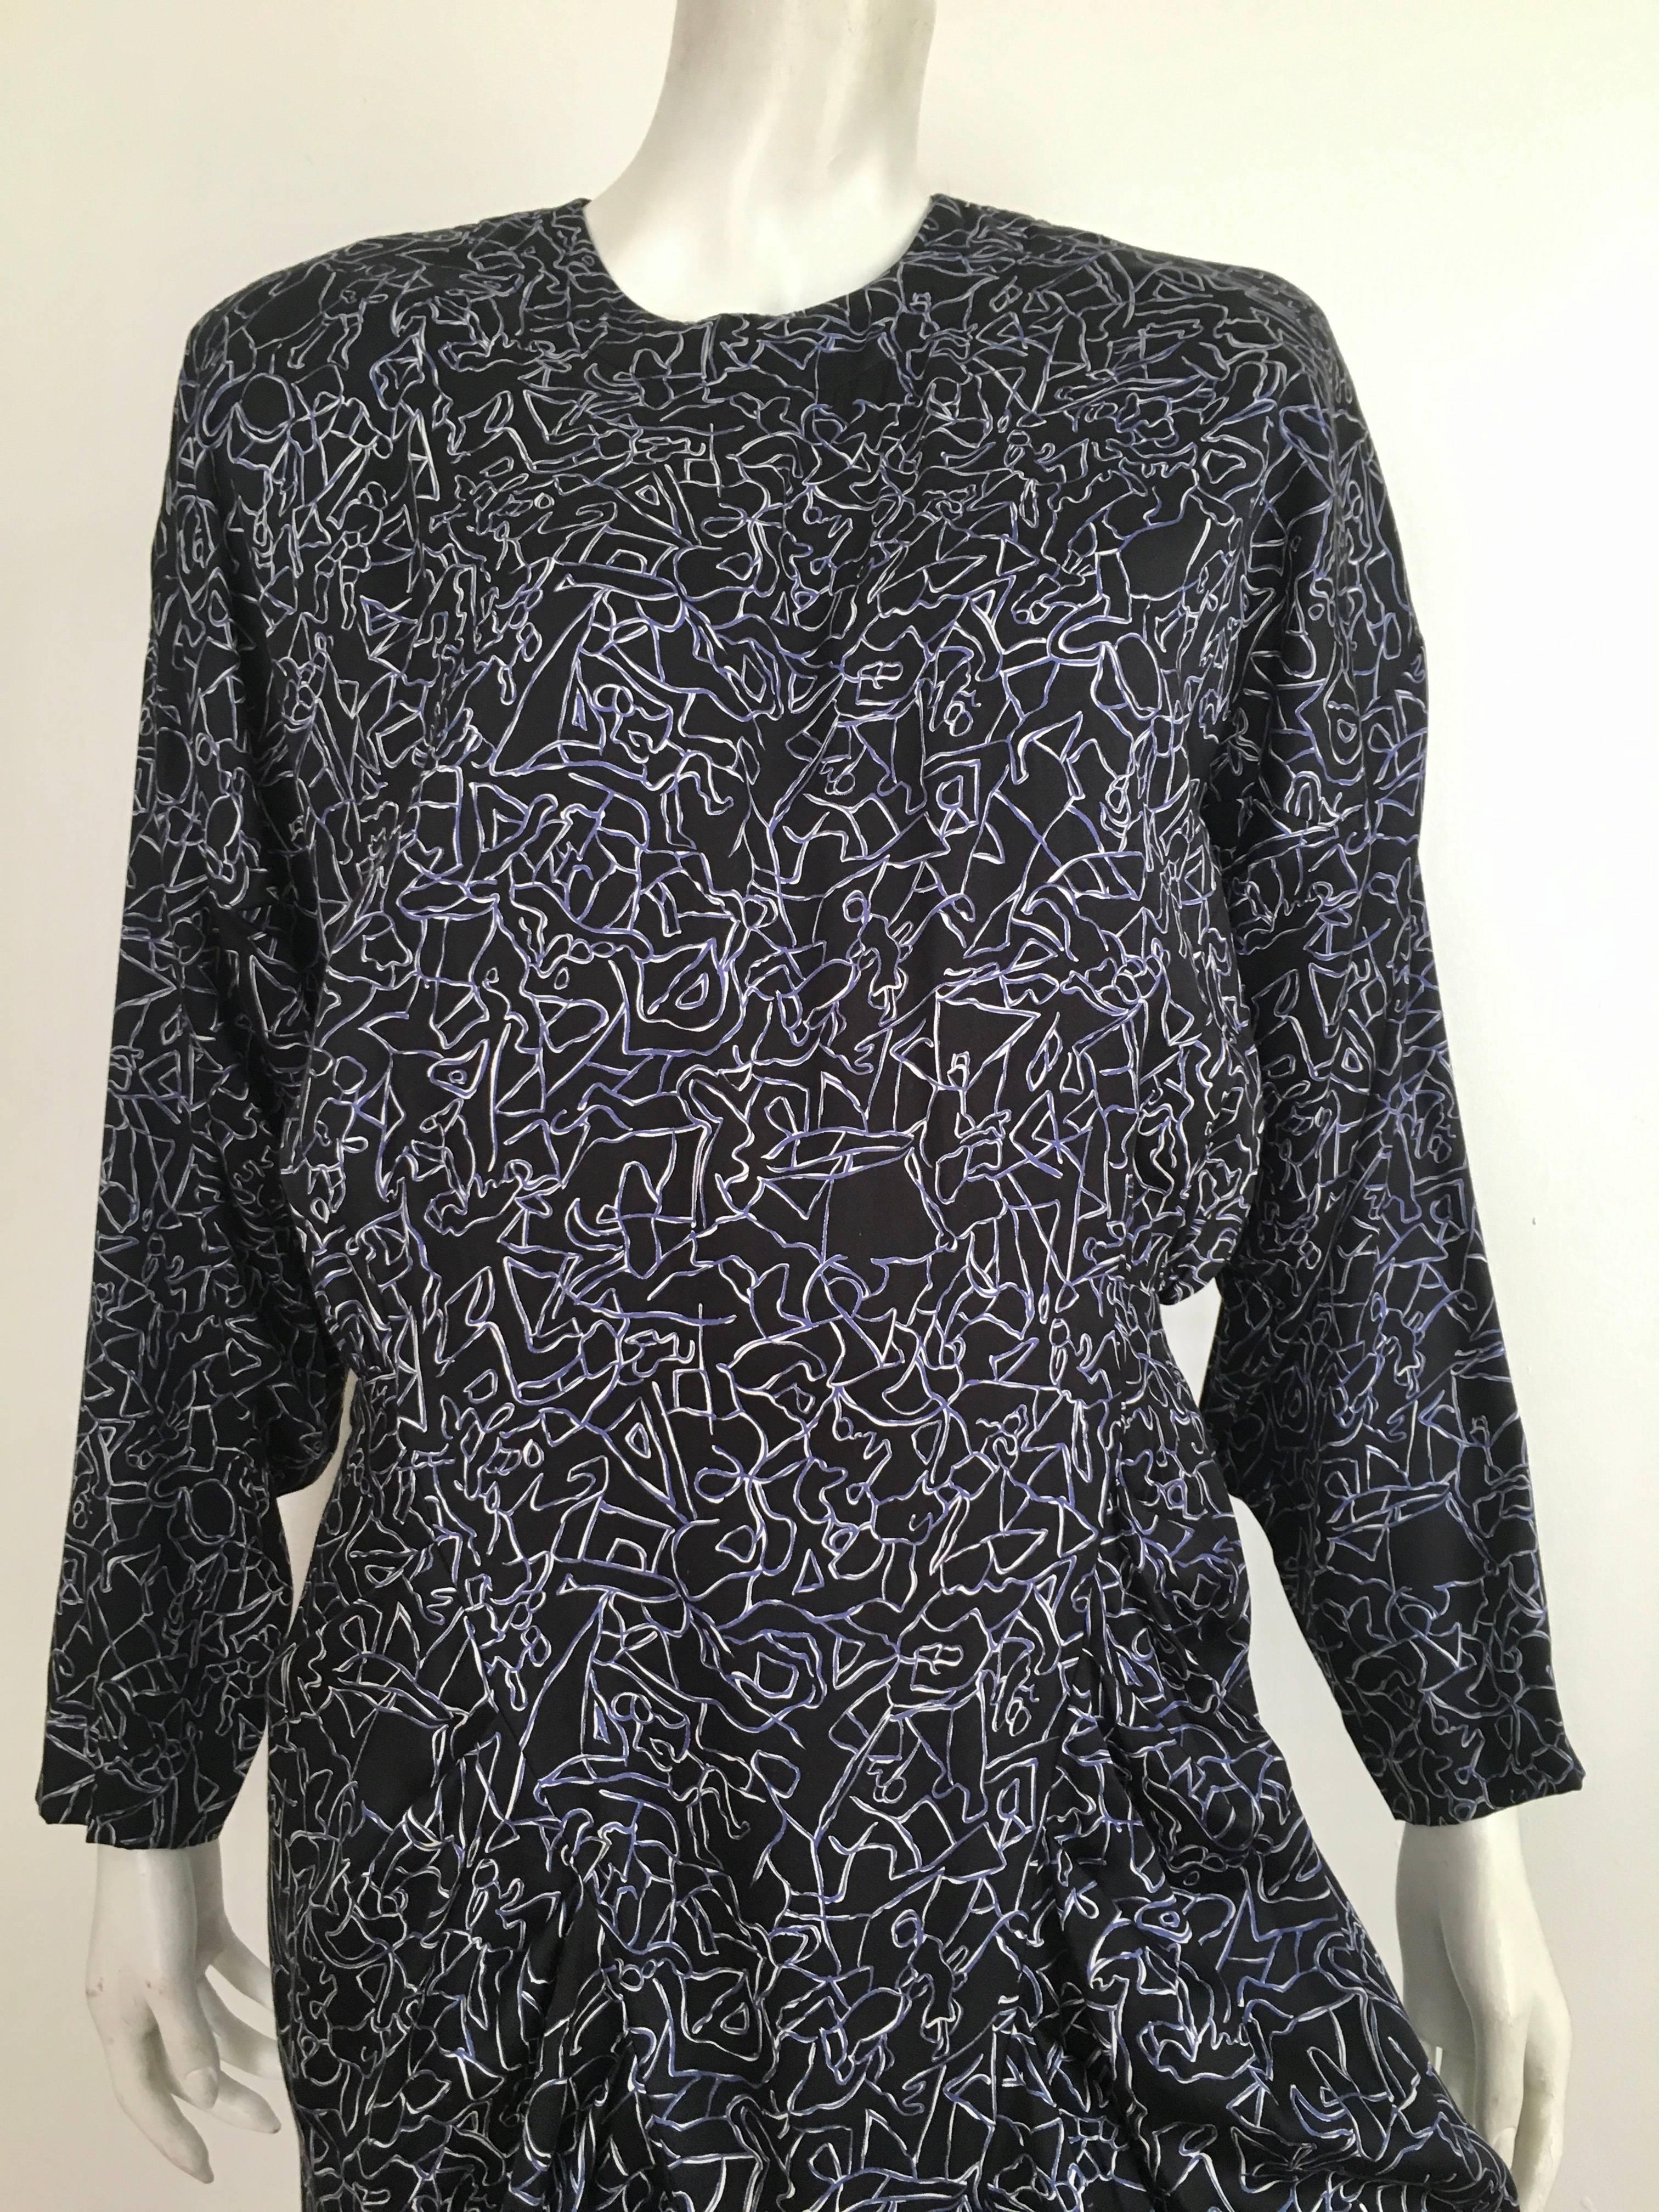 Nicole Miller 1980s black cotton abstract print aesthetic design dress is labeled a size 12 but fits like a modern USA size 10.  Ladies please grab your trusted tape measure so you can properly measure your bust, waist & hips to make certain